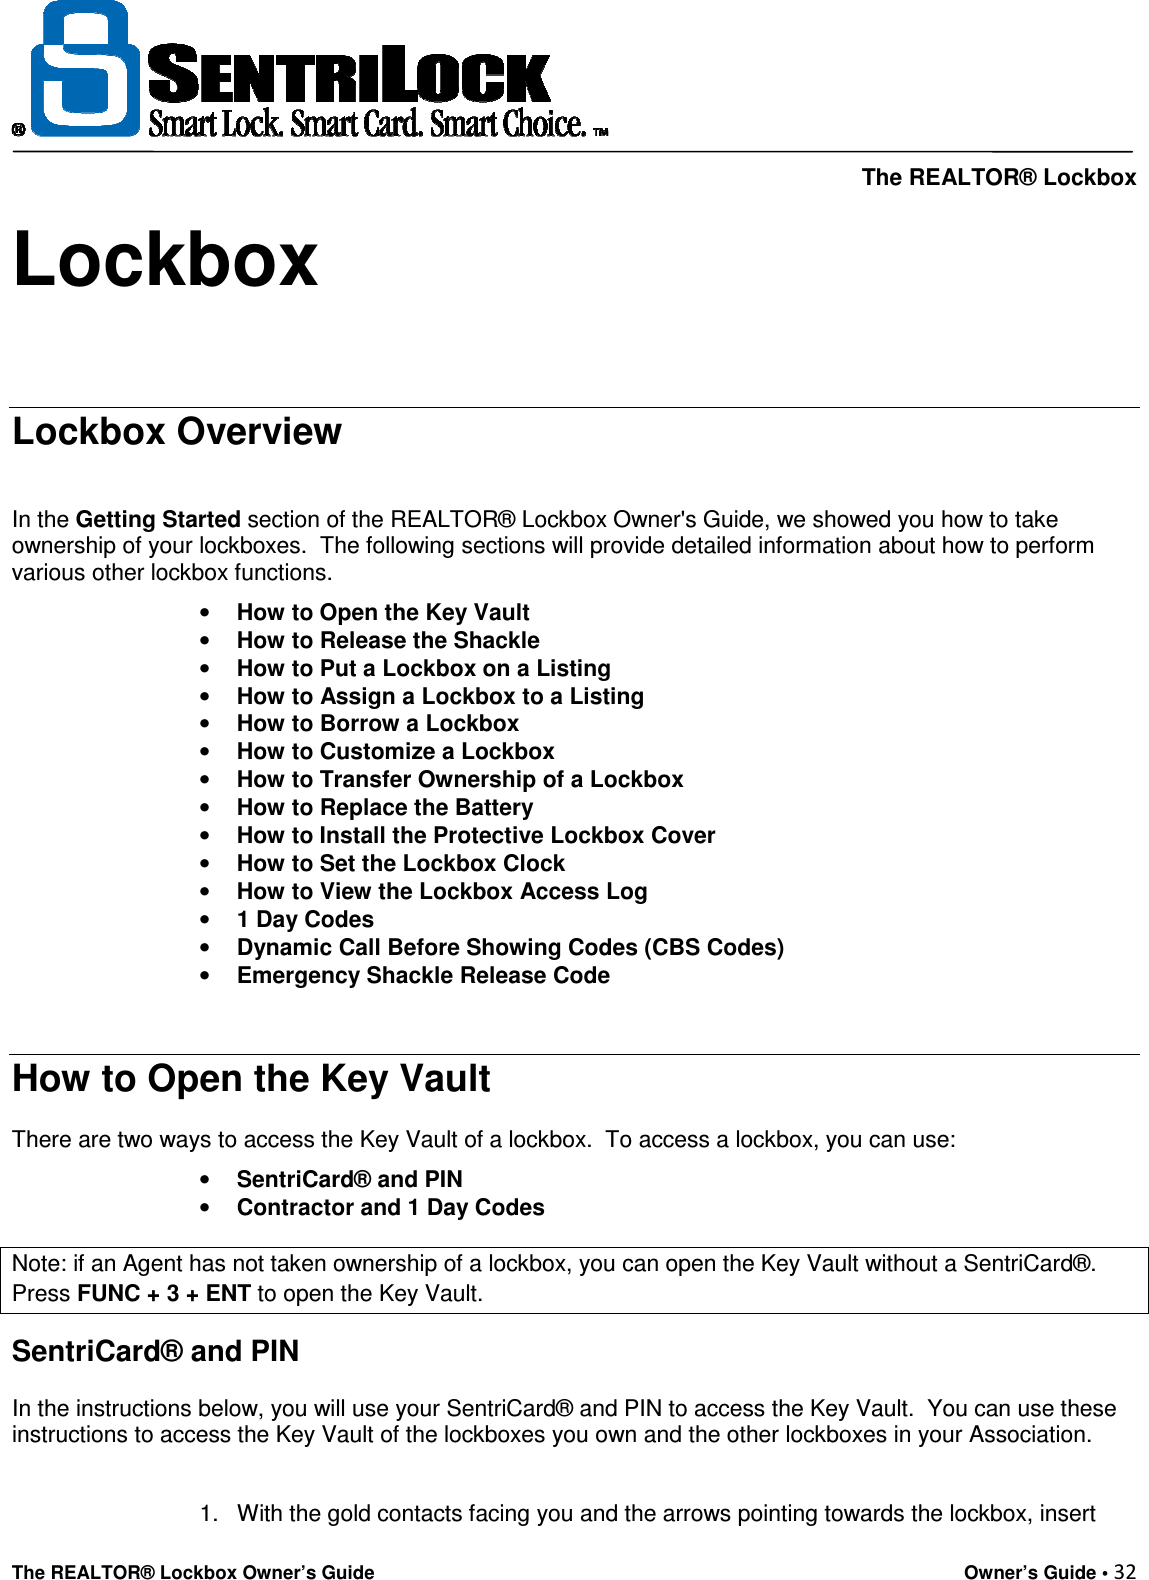     The REALTOR® Lockbox The REALTOR® Lockbox Owner’s Guide    Owner’s Guide • 32  Lockbox     Lockbox Overview   In the Getting Started section of the REALTOR® Lockbox Owner&apos;s Guide, we showed you how to take ownership of your lockboxes.  The following sections will provide detailed information about how to perform various other lockbox functions.  • How to Open the Key Vault  • How to Release the Shackle  • How to Put a Lockbox on a Listing  • How to Assign a Lockbox to a Listing  • How to Borrow a Lockbox  • How to Customize a Lockbox  • How to Transfer Ownership of a Lockbox  • How to Replace the Battery  • How to Install the Protective Lockbox Cover  • How to Set the Lockbox Clock  • How to View the Lockbox Access Log  • 1 Day Codes  • Dynamic Call Before Showing Codes (CBS Codes) • Emergency Shackle Release Code   How to Open the Key Vault  There are two ways to access the Key Vault of a lockbox.  To access a lockbox, you can use:  • SentriCard® and PIN  • Contractor and 1 Day Codes  Note: if an Agent has not taken ownership of a lockbox, you can open the Key Vault without a SentriCard®. Press FUNC + 3 + ENT to open the Key Vault. SentriCard® and PIN  In the instructions below, you will use your SentriCard® and PIN to access the Key Vault.  You can use these instructions to access the Key Vault of the lockboxes you own and the other lockboxes in your Association.    1.  With the gold contacts facing you and the arrows pointing towards the lockbox, insert 